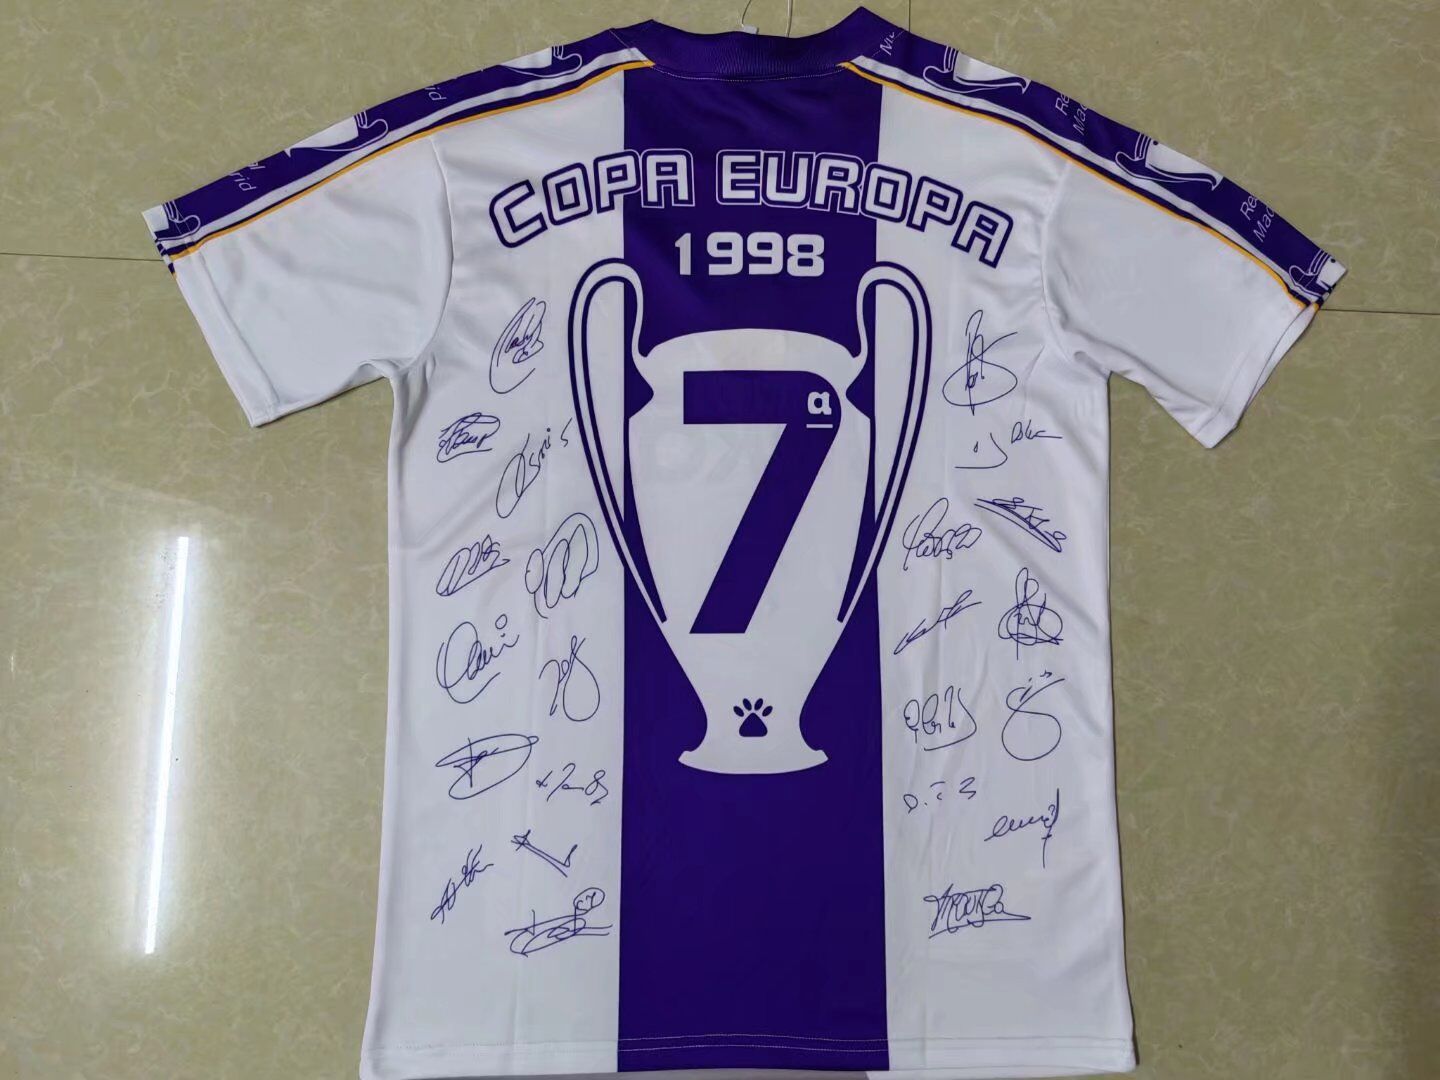 Real Madrid Retro Jersey UCL Commemorate 1997/98